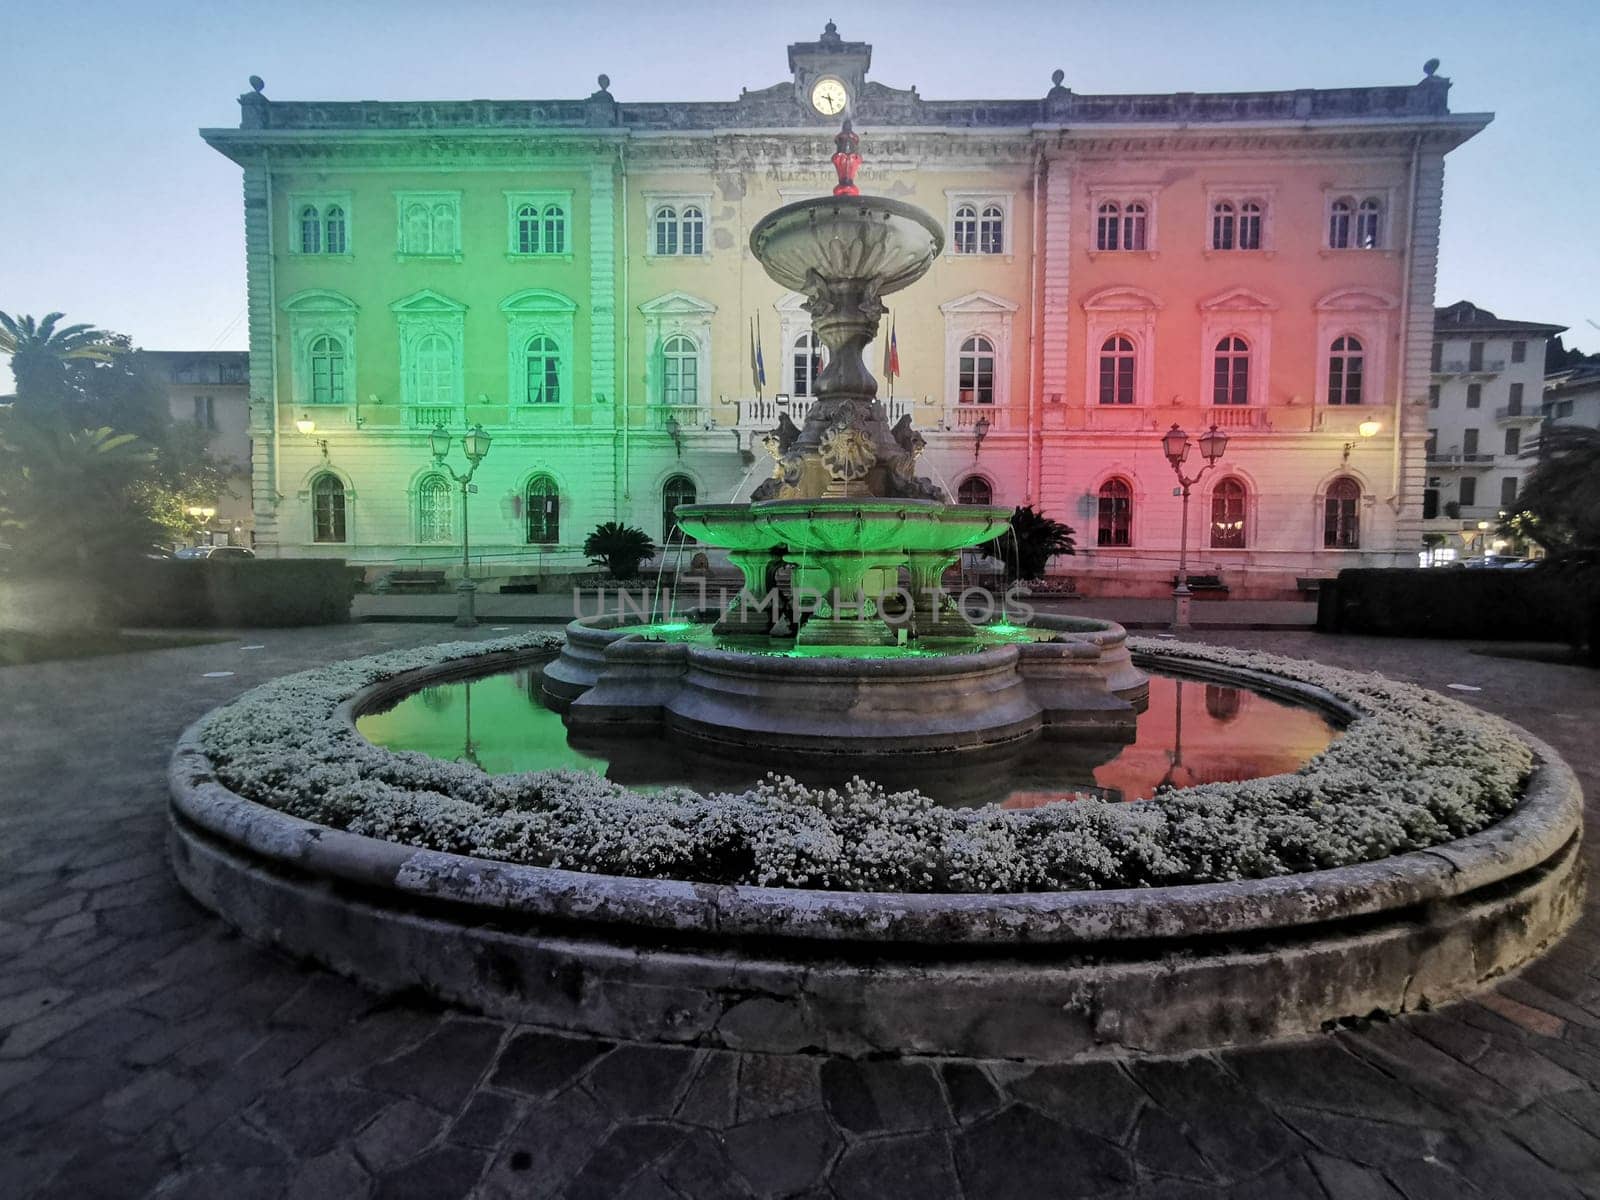 alassio italy city hall illuminated at night red green and white